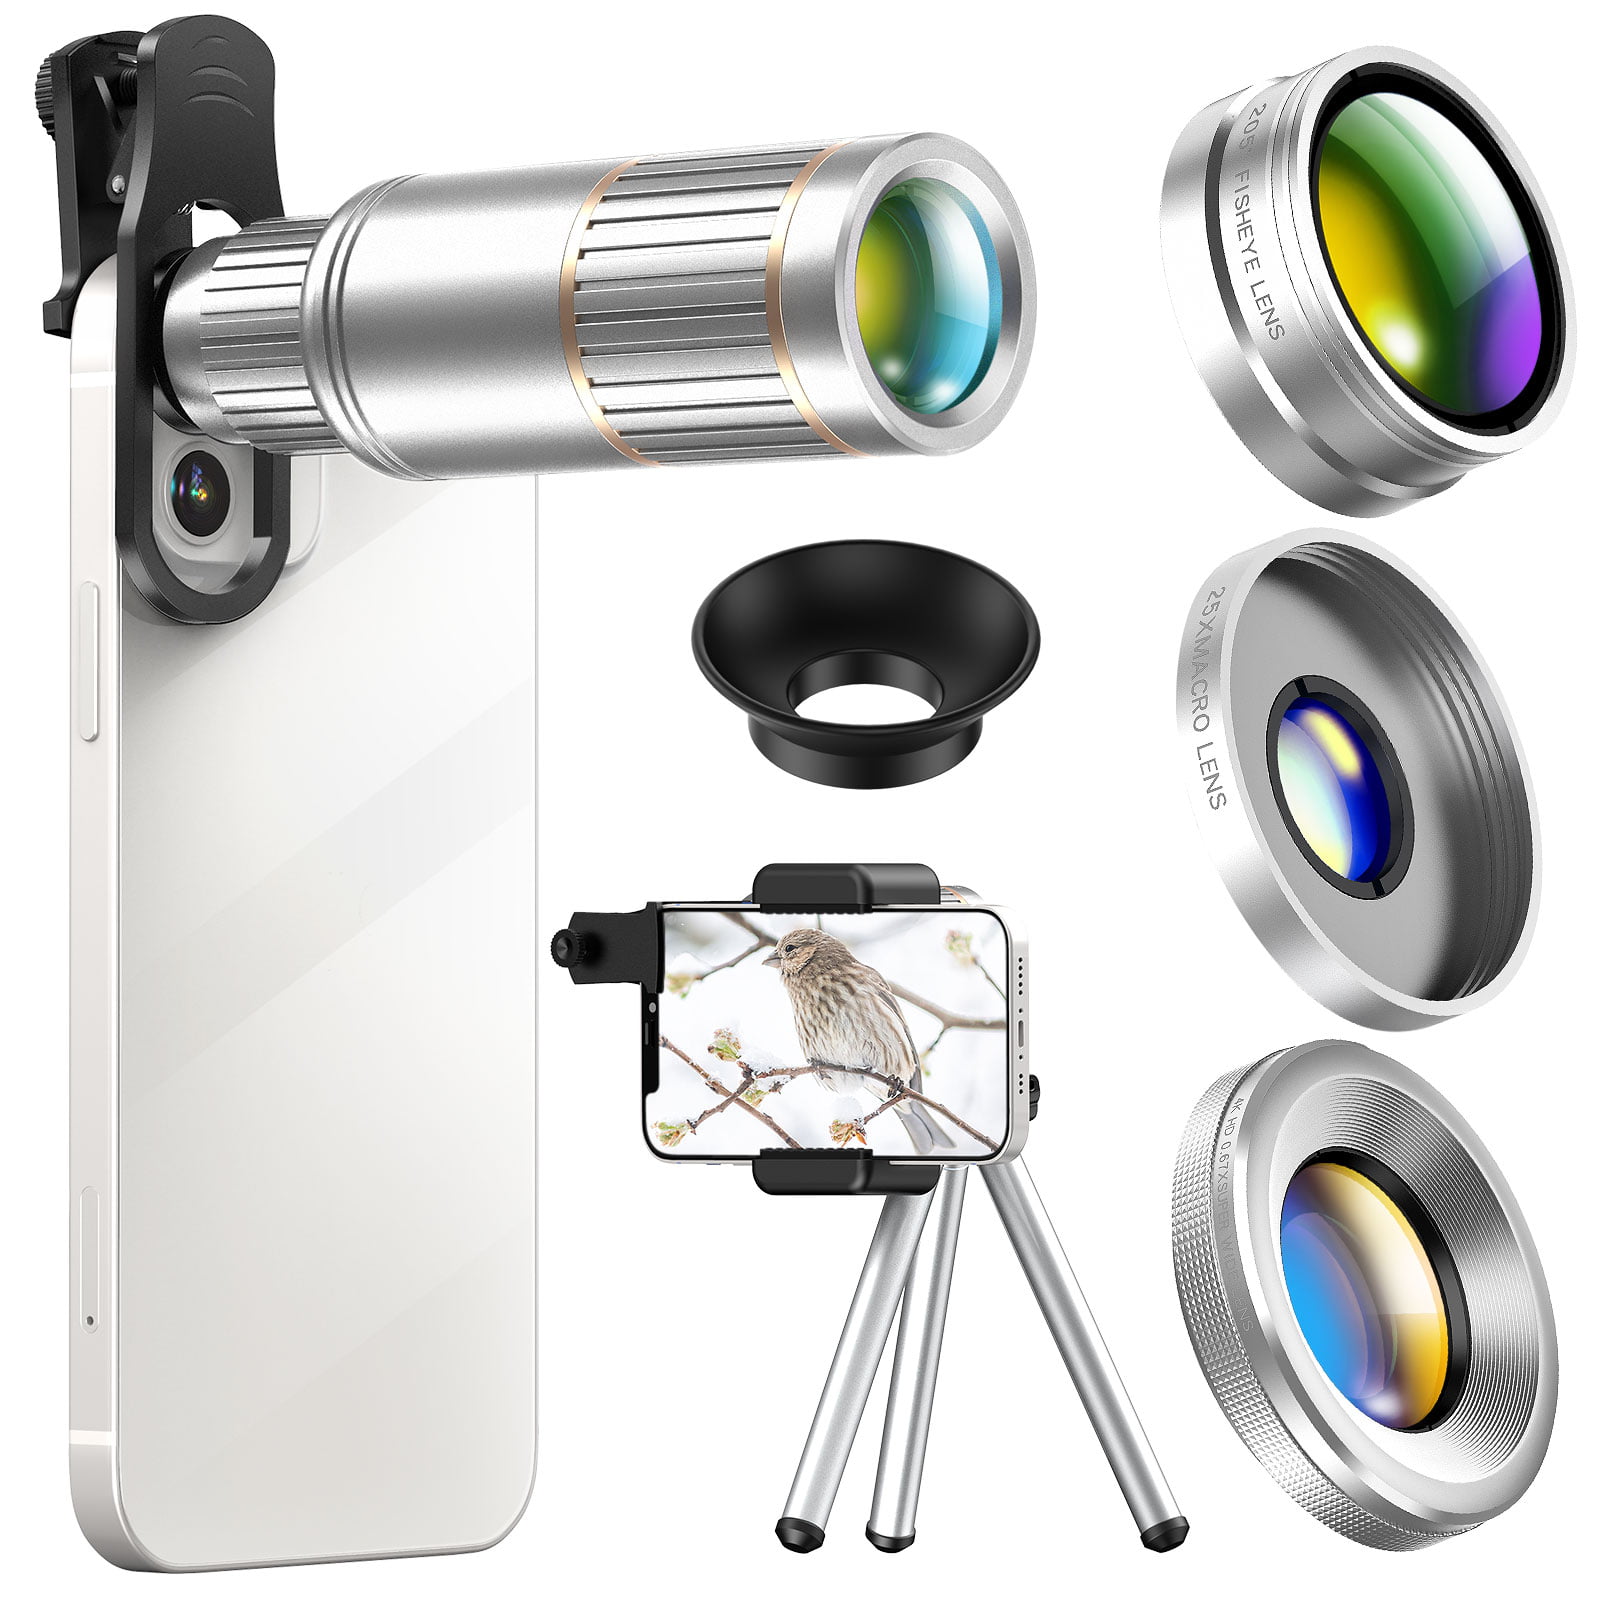 Macro Lens Wide Angle Lens Light Samsung 12X Zoom Telephoto Camera Lens Android,Black,1PC Pocket Zoom Hd Pixel Pro Pack Cell Phone Camera Lens Kit Clip on Phone Lens Compatible for Iphone 